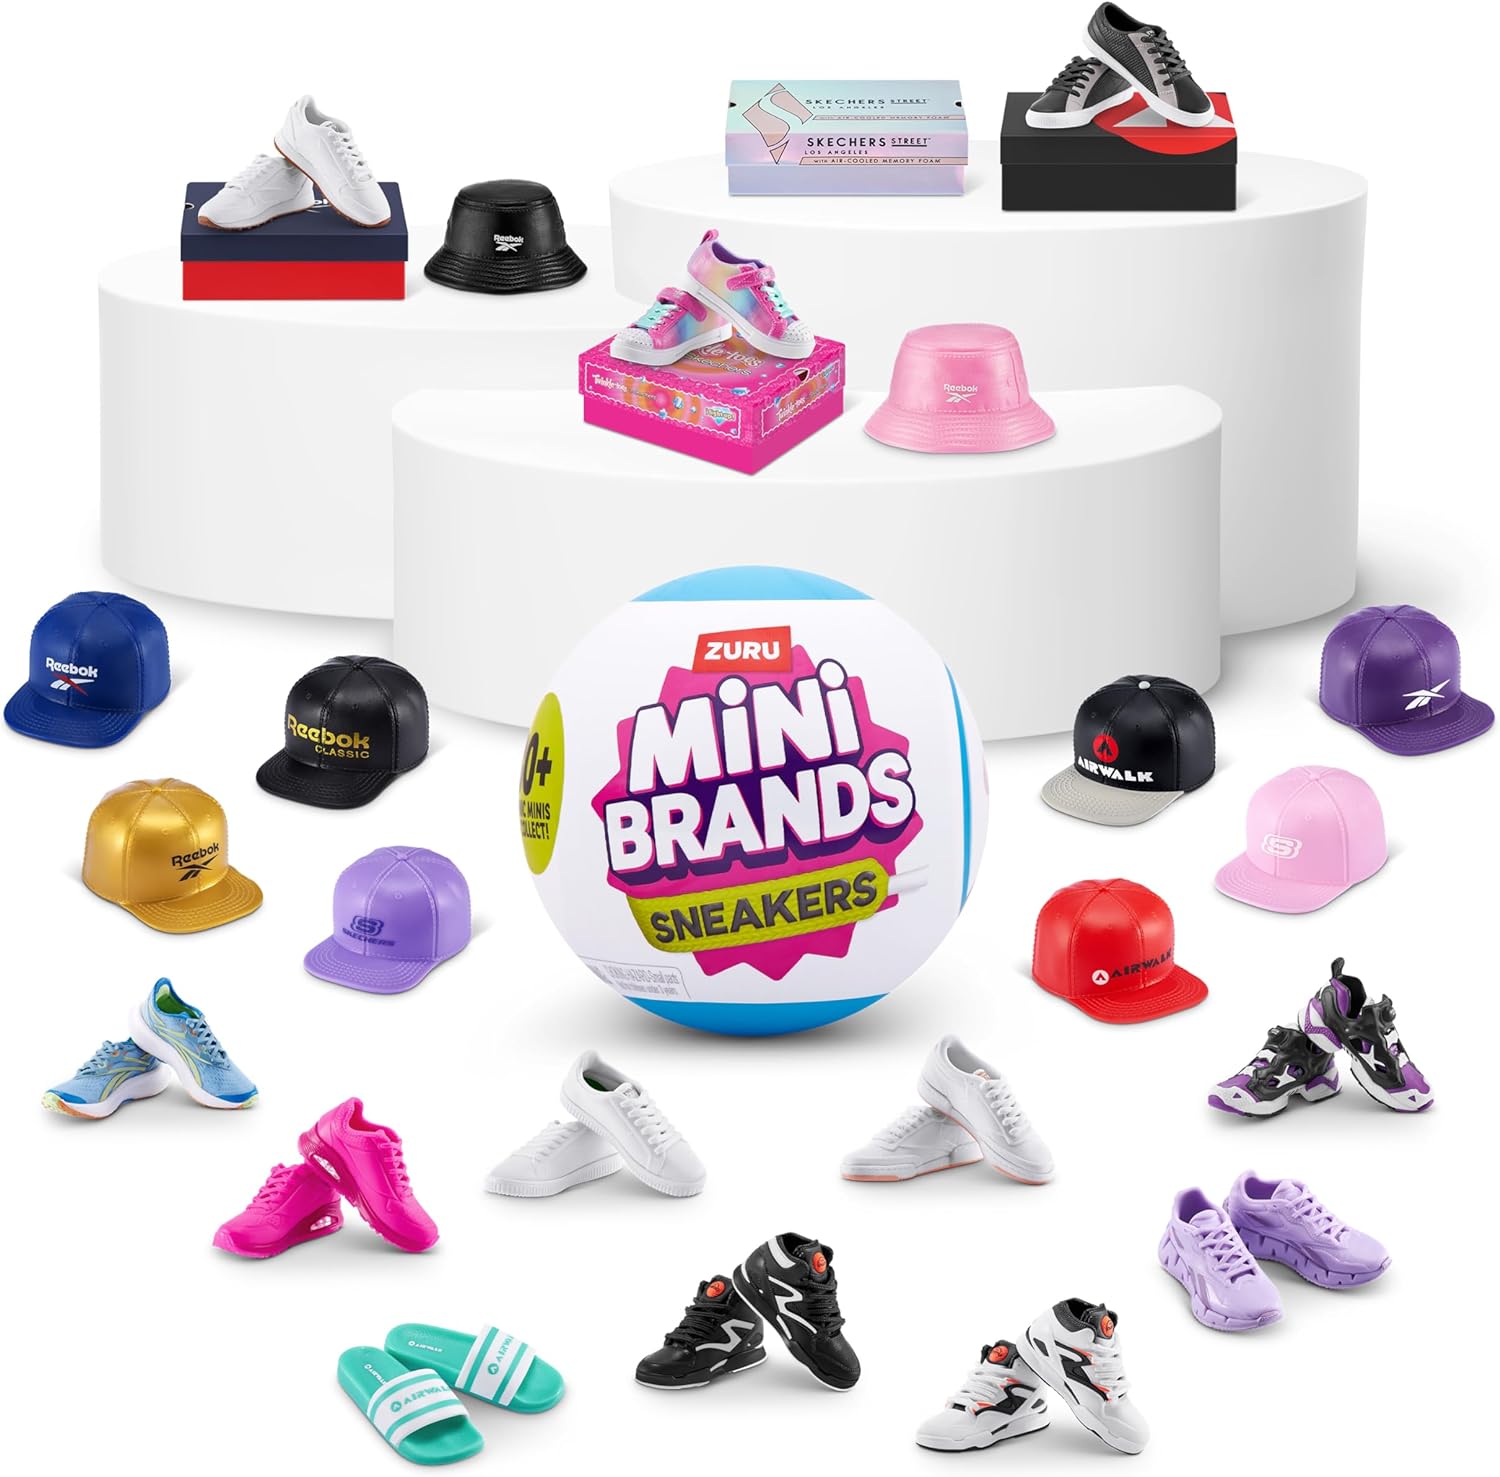 Mini Brands Sneakers Capsule by ZURU Real Miniature Sneaker Brands Collectible Toy, Capsules of 5 Mystery Miniature Brands for Girls, Teens, Adults and Collectors